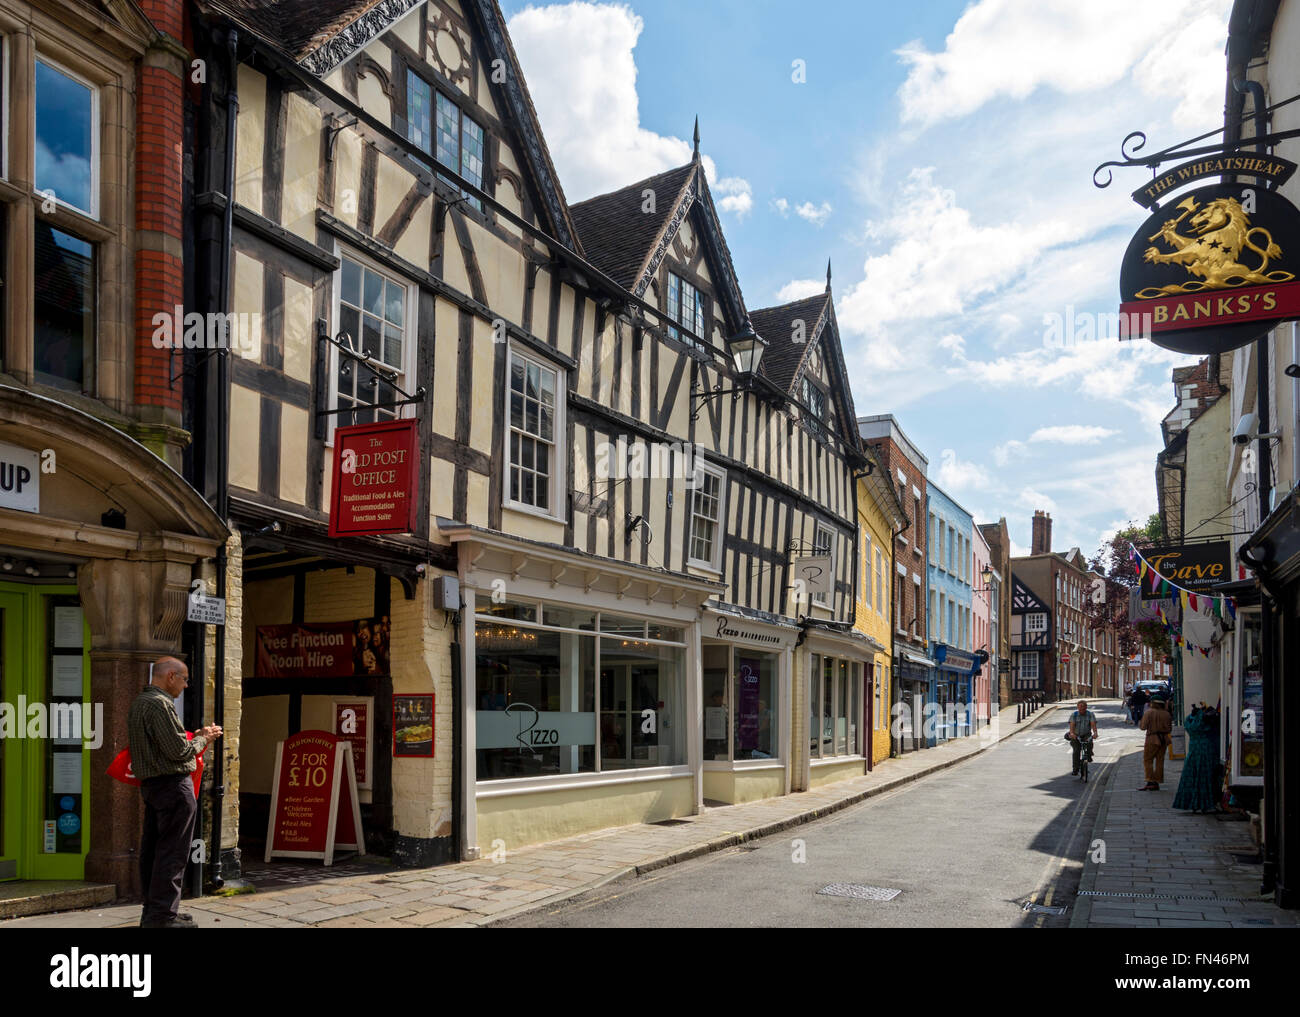 The Old Post Office inn and other timber-framed buildings on Milk Street, Shrewsbury, Shropshire, England, UK Stock Photo